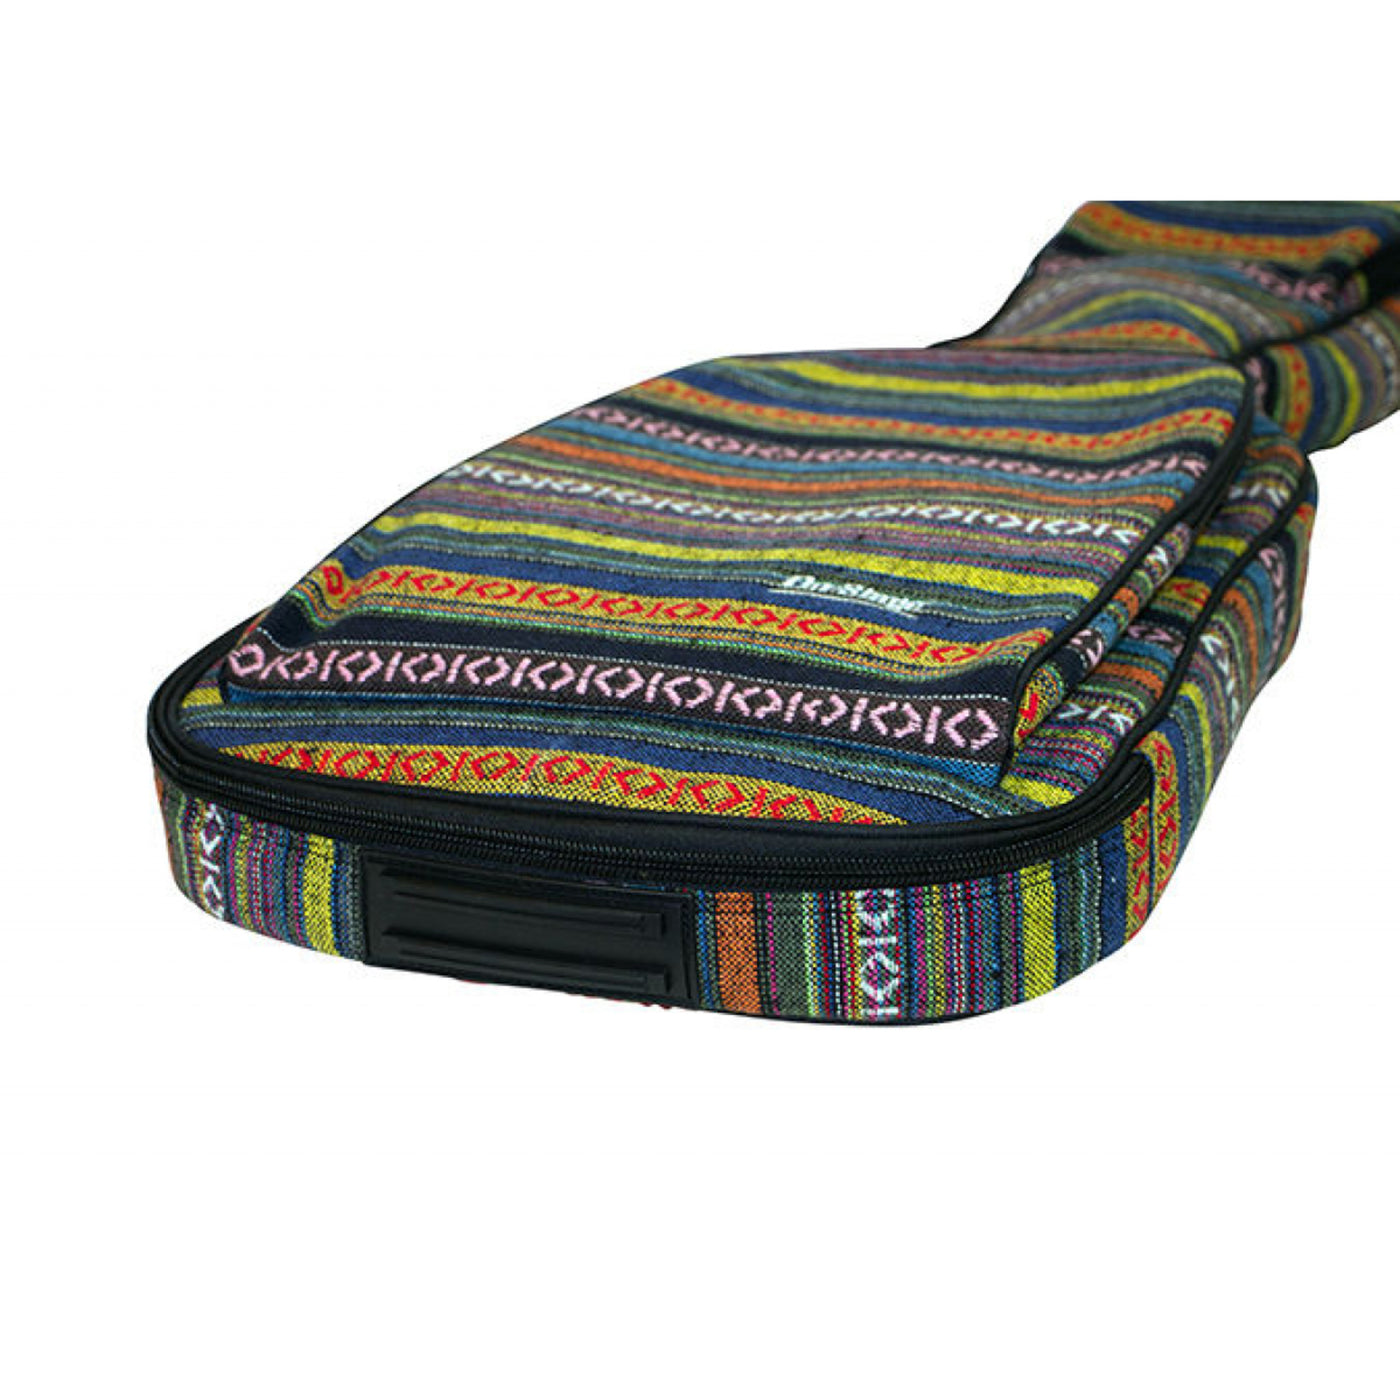 On-Stage Weather-Resistant Electric Guitar Bag, Multi-Colored Stripes (GBE4770S)